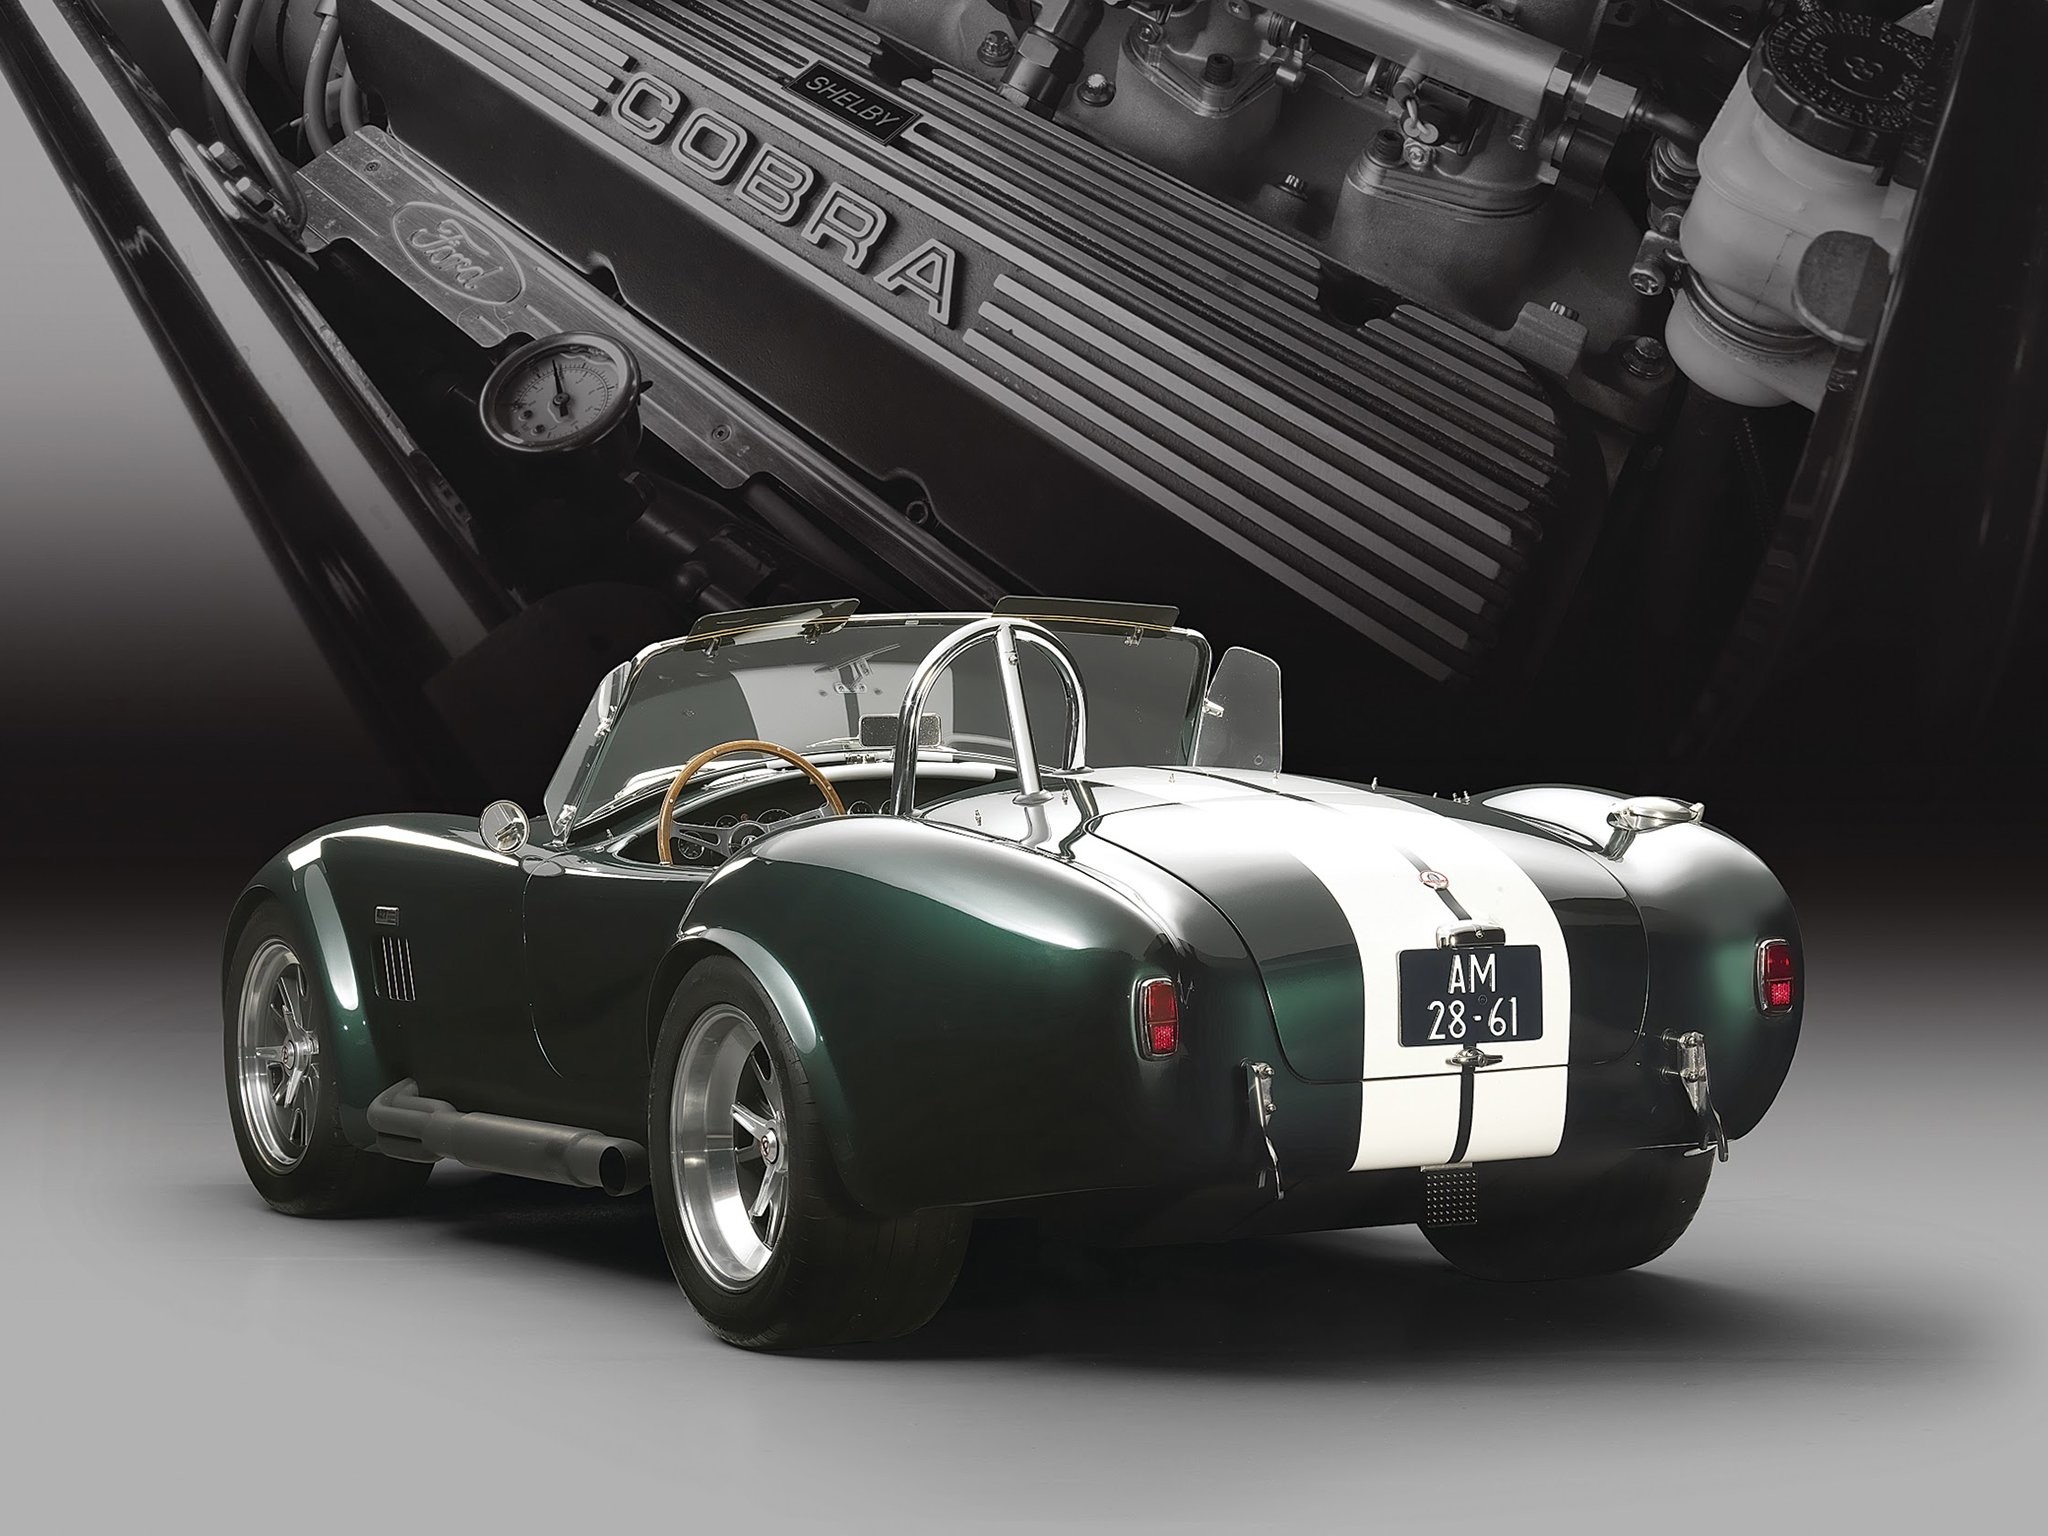 2048x1536 1965 Shelby Cobra 427 MkIII supercar hot rod rods muscle classic g wallpaper  |  | 298149 | WallpaperUP